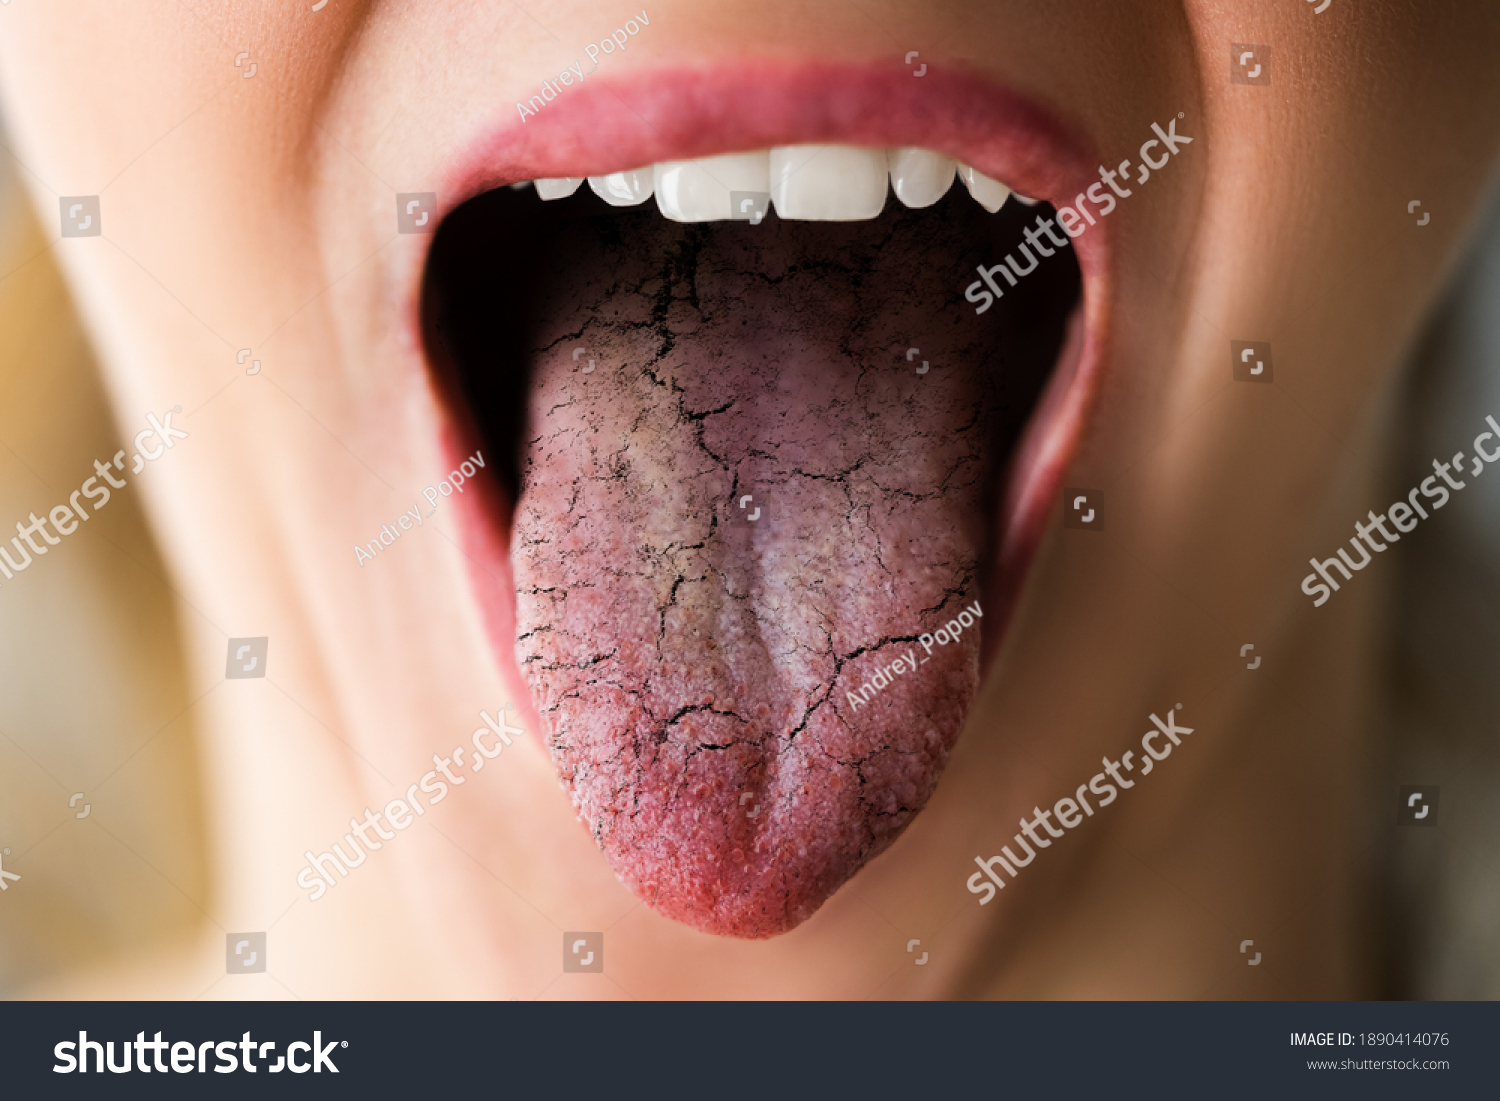 Woman Tongue With Bad Bacteria Candidiasis And Pain #1890414076